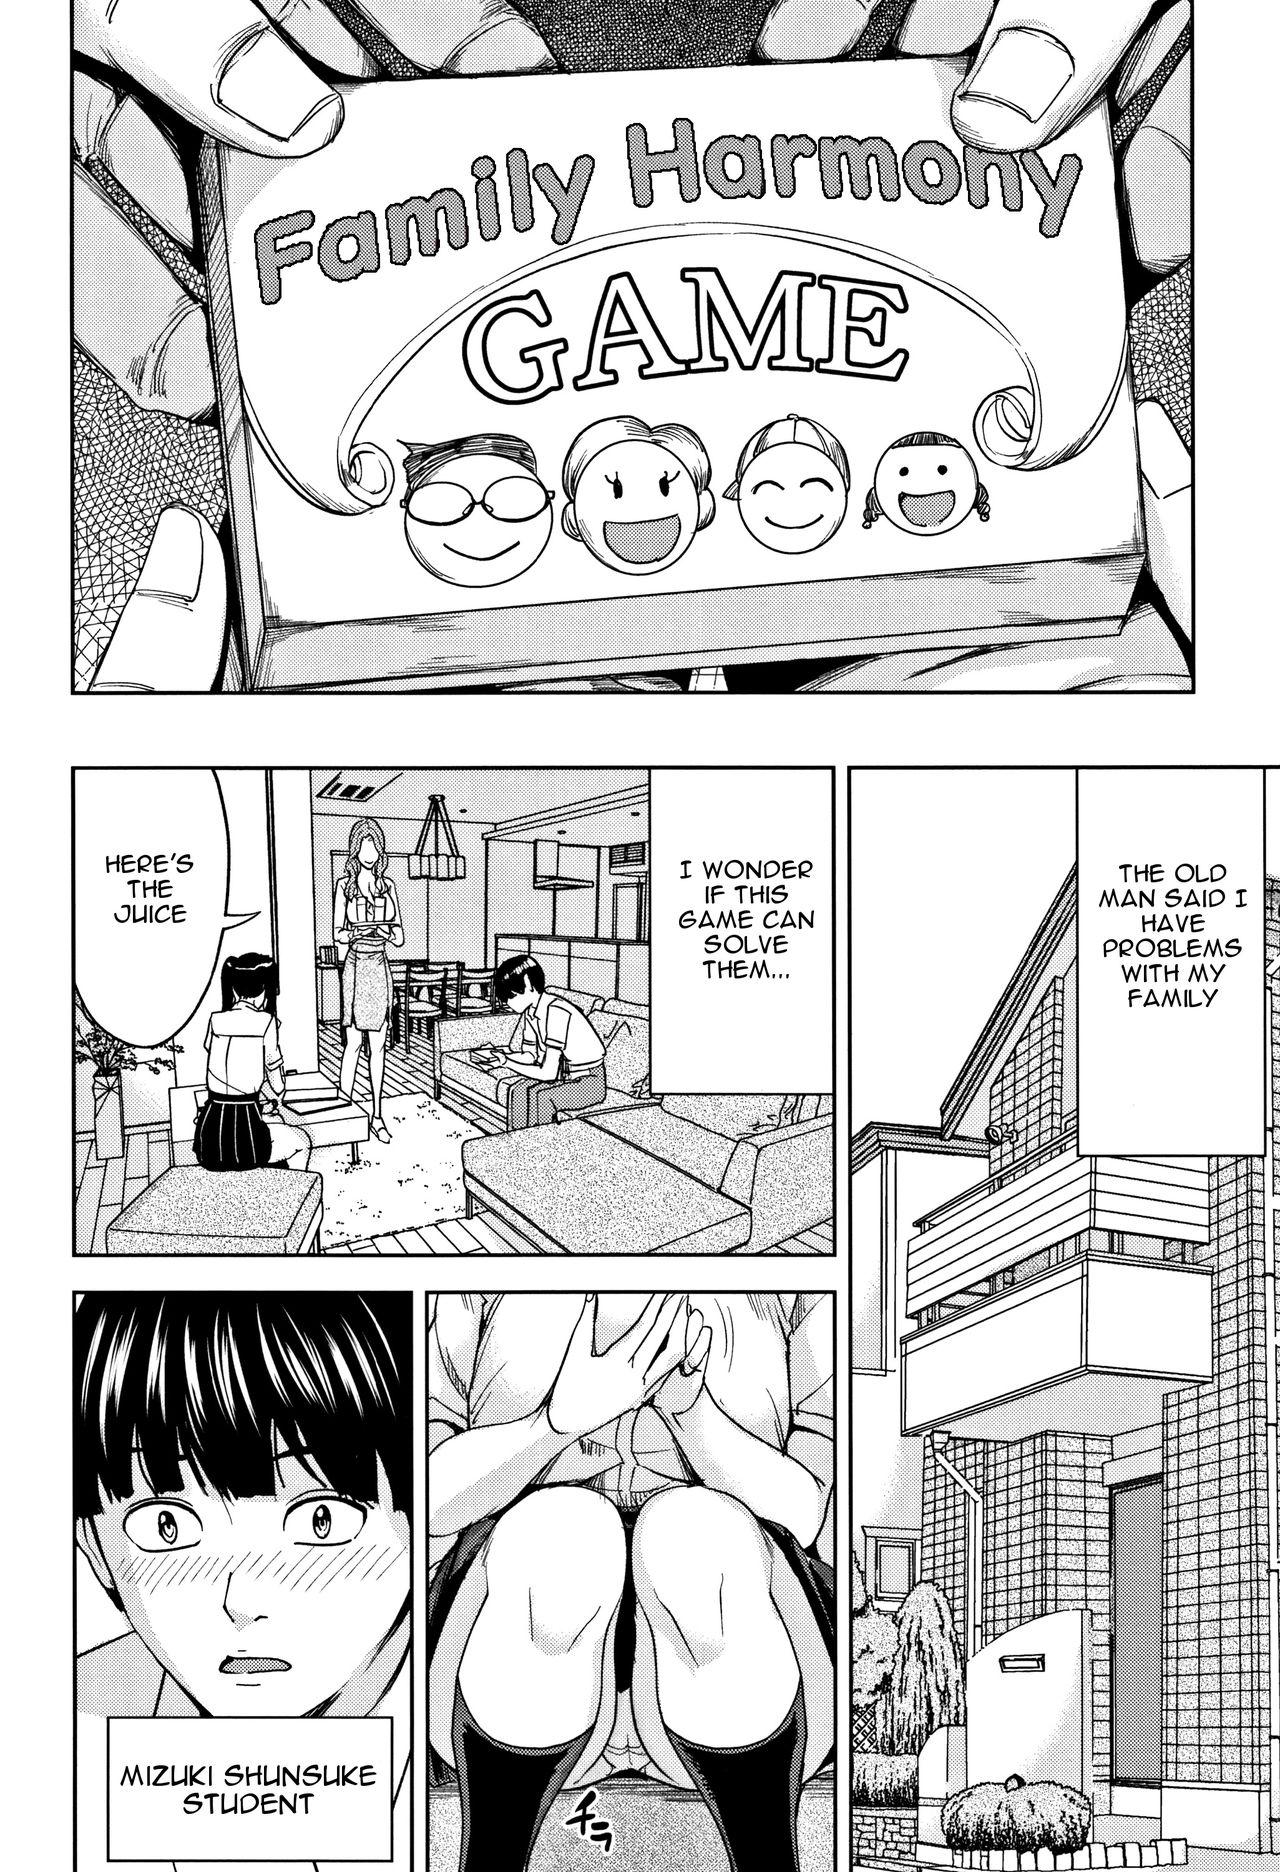 Best Blowjobs Ever Kazoku Soukan Game - family Incest game Ch. 1&2 Rubia - Page 10